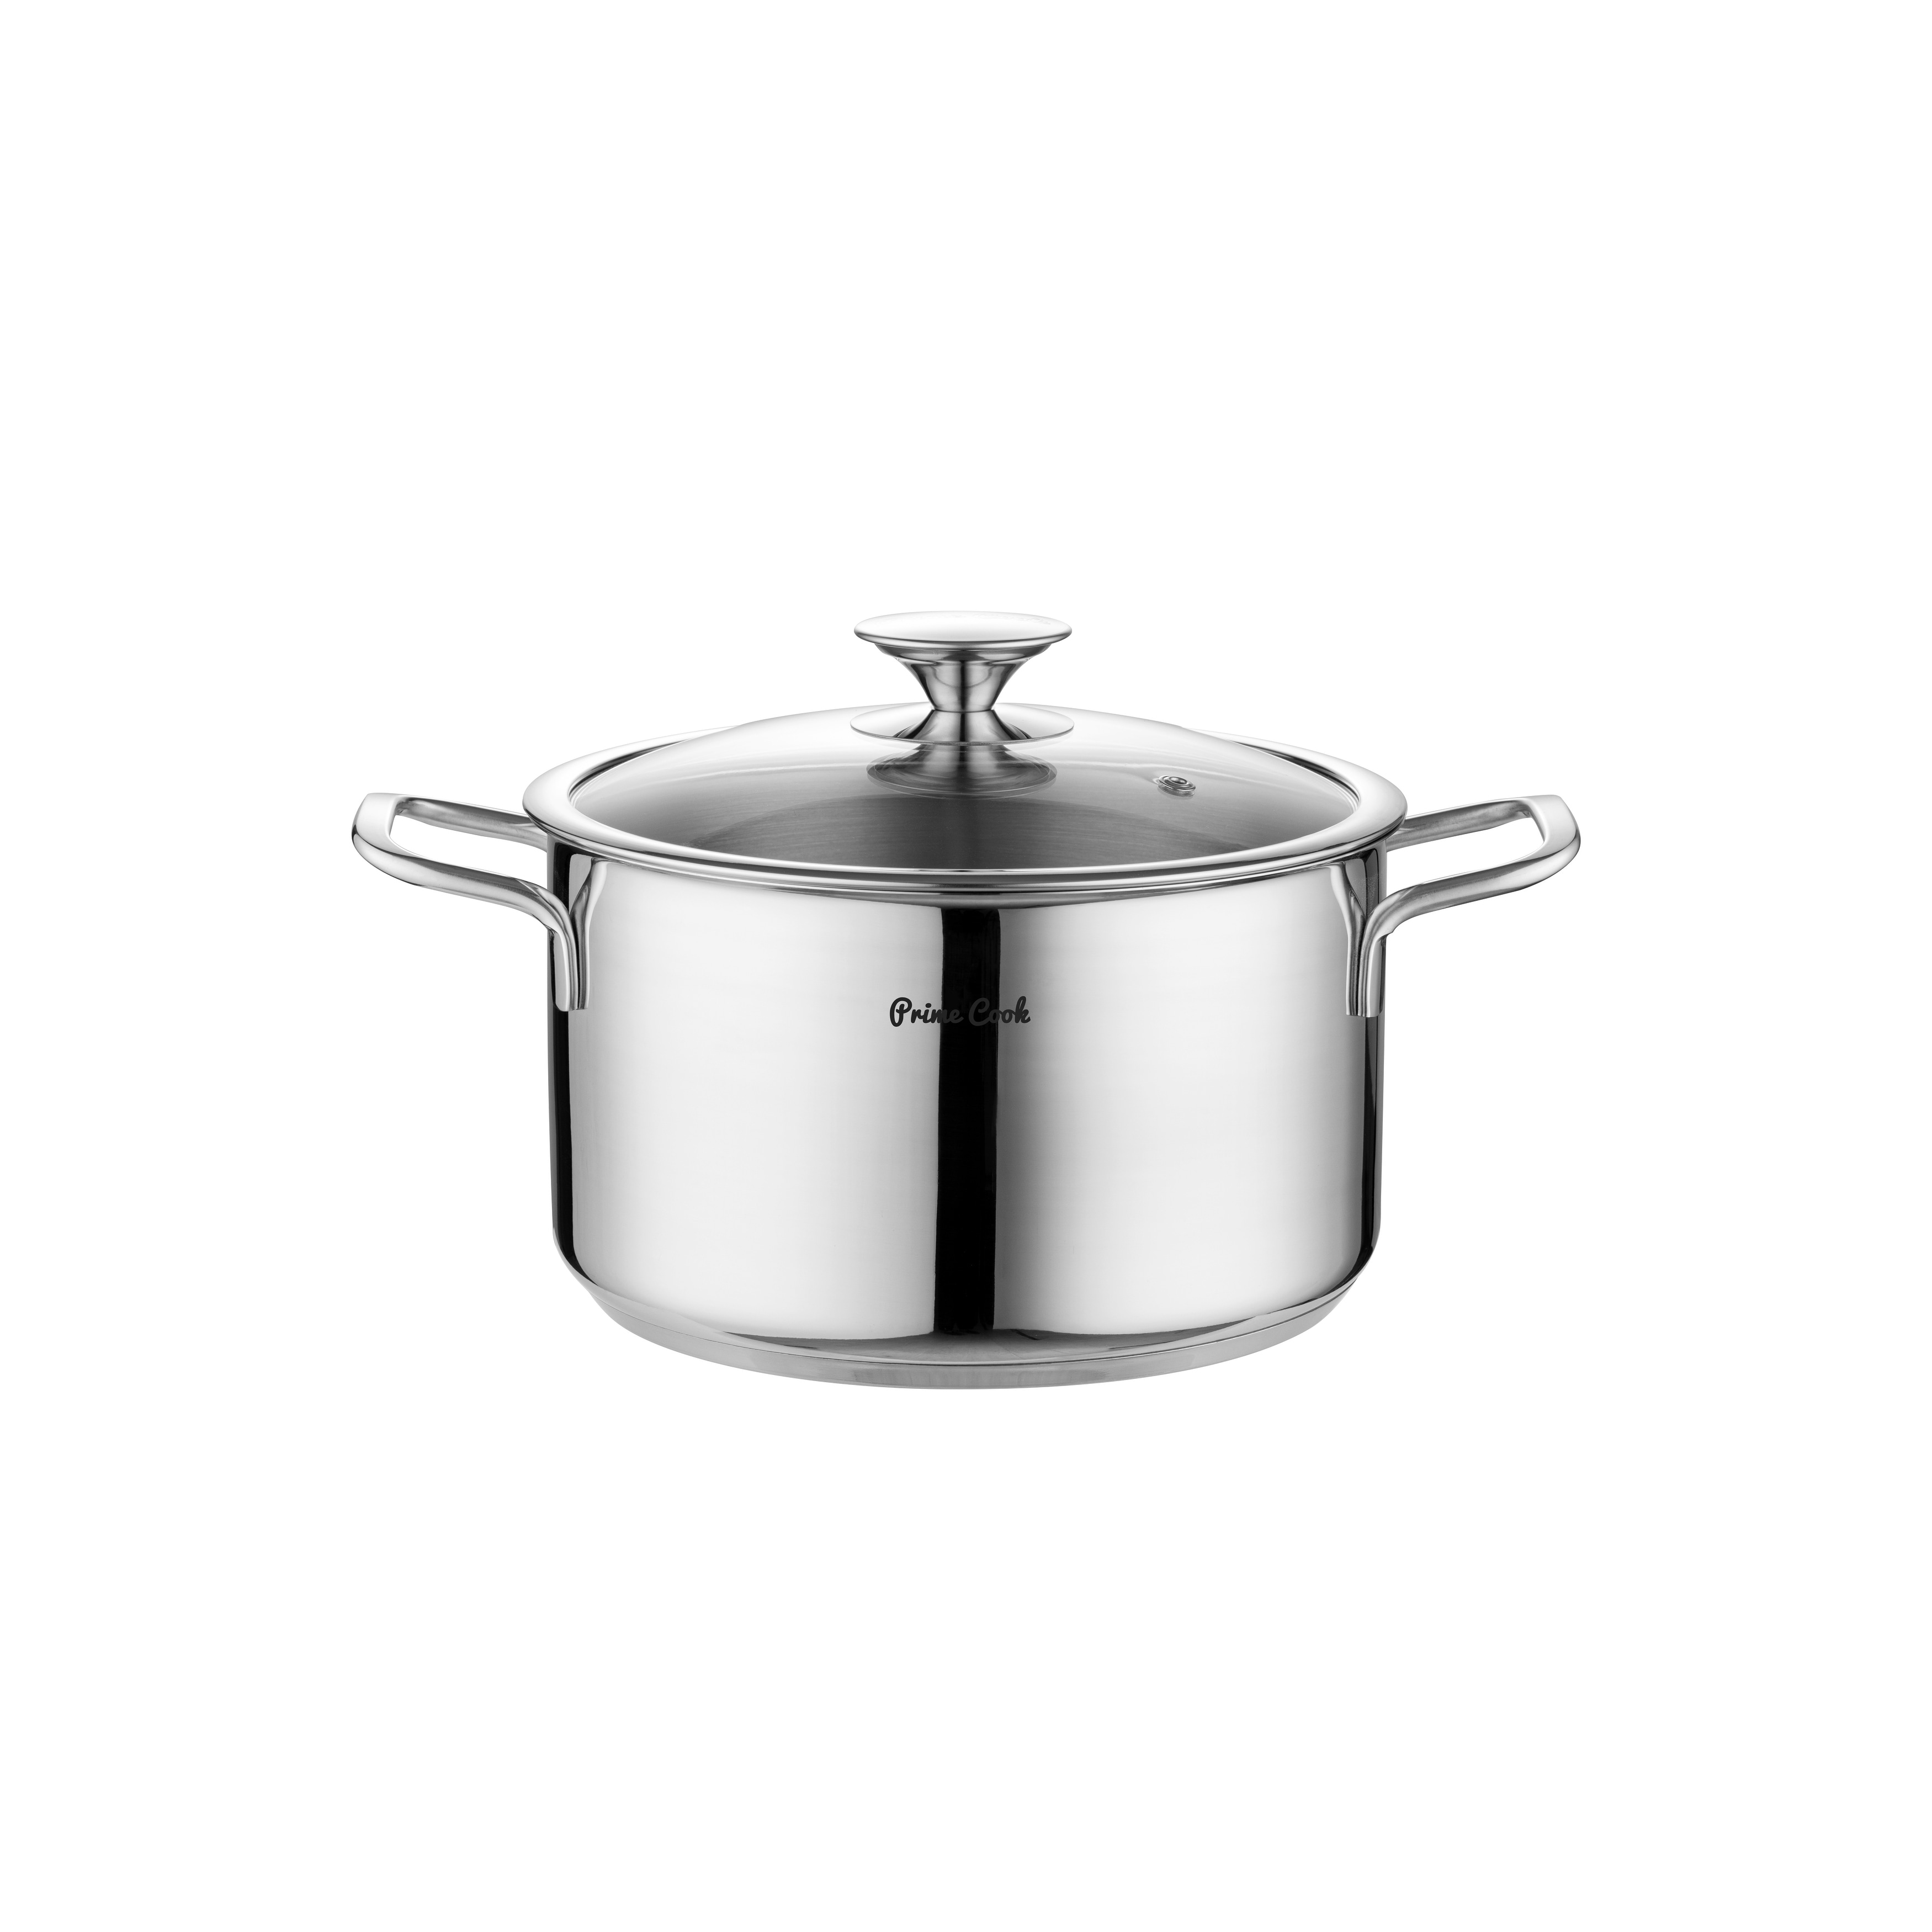 NUtrichef Stainless Steel Cookware Stock Pot - 5 Quart, Heavy Duty  Induction Pot